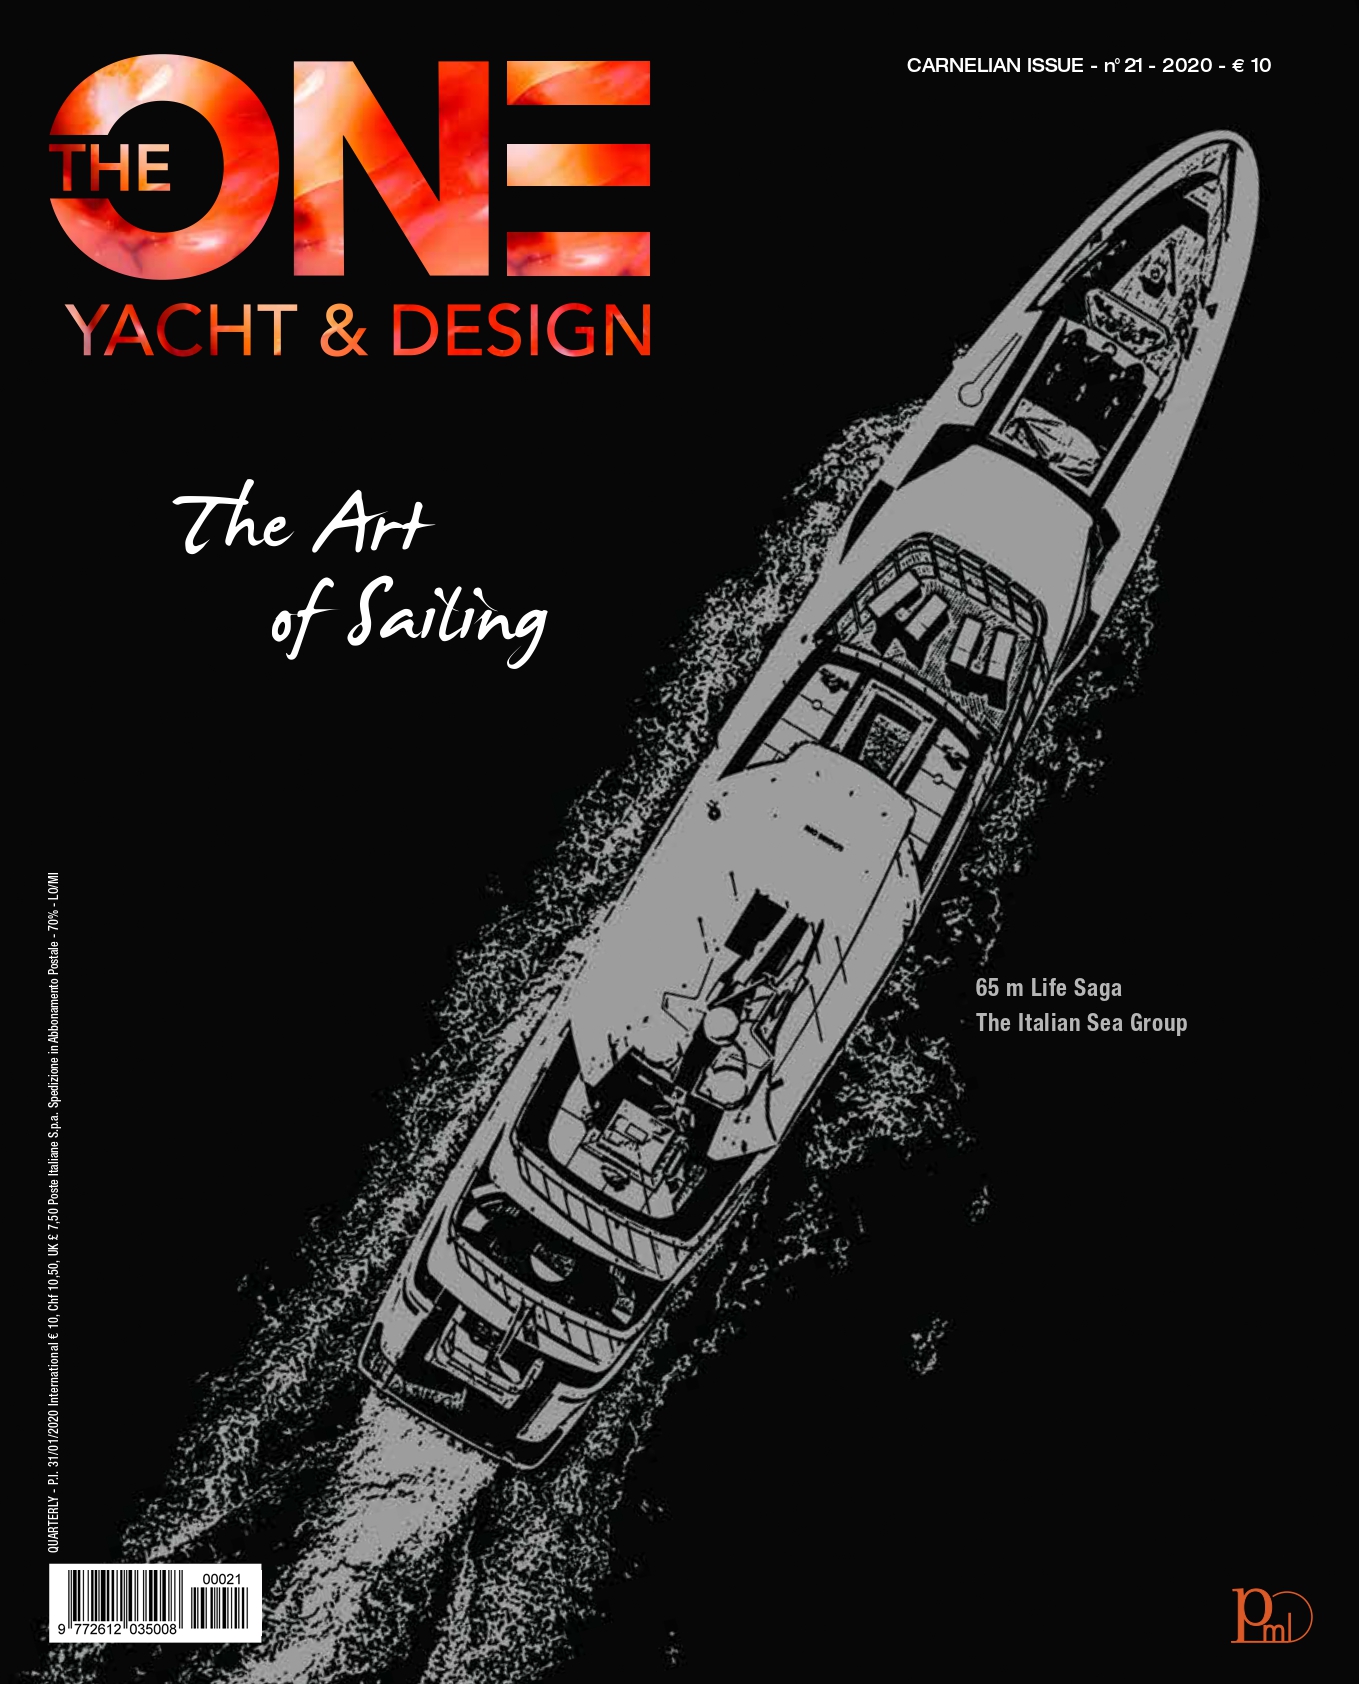 THE ONE YACHT & DESIGN